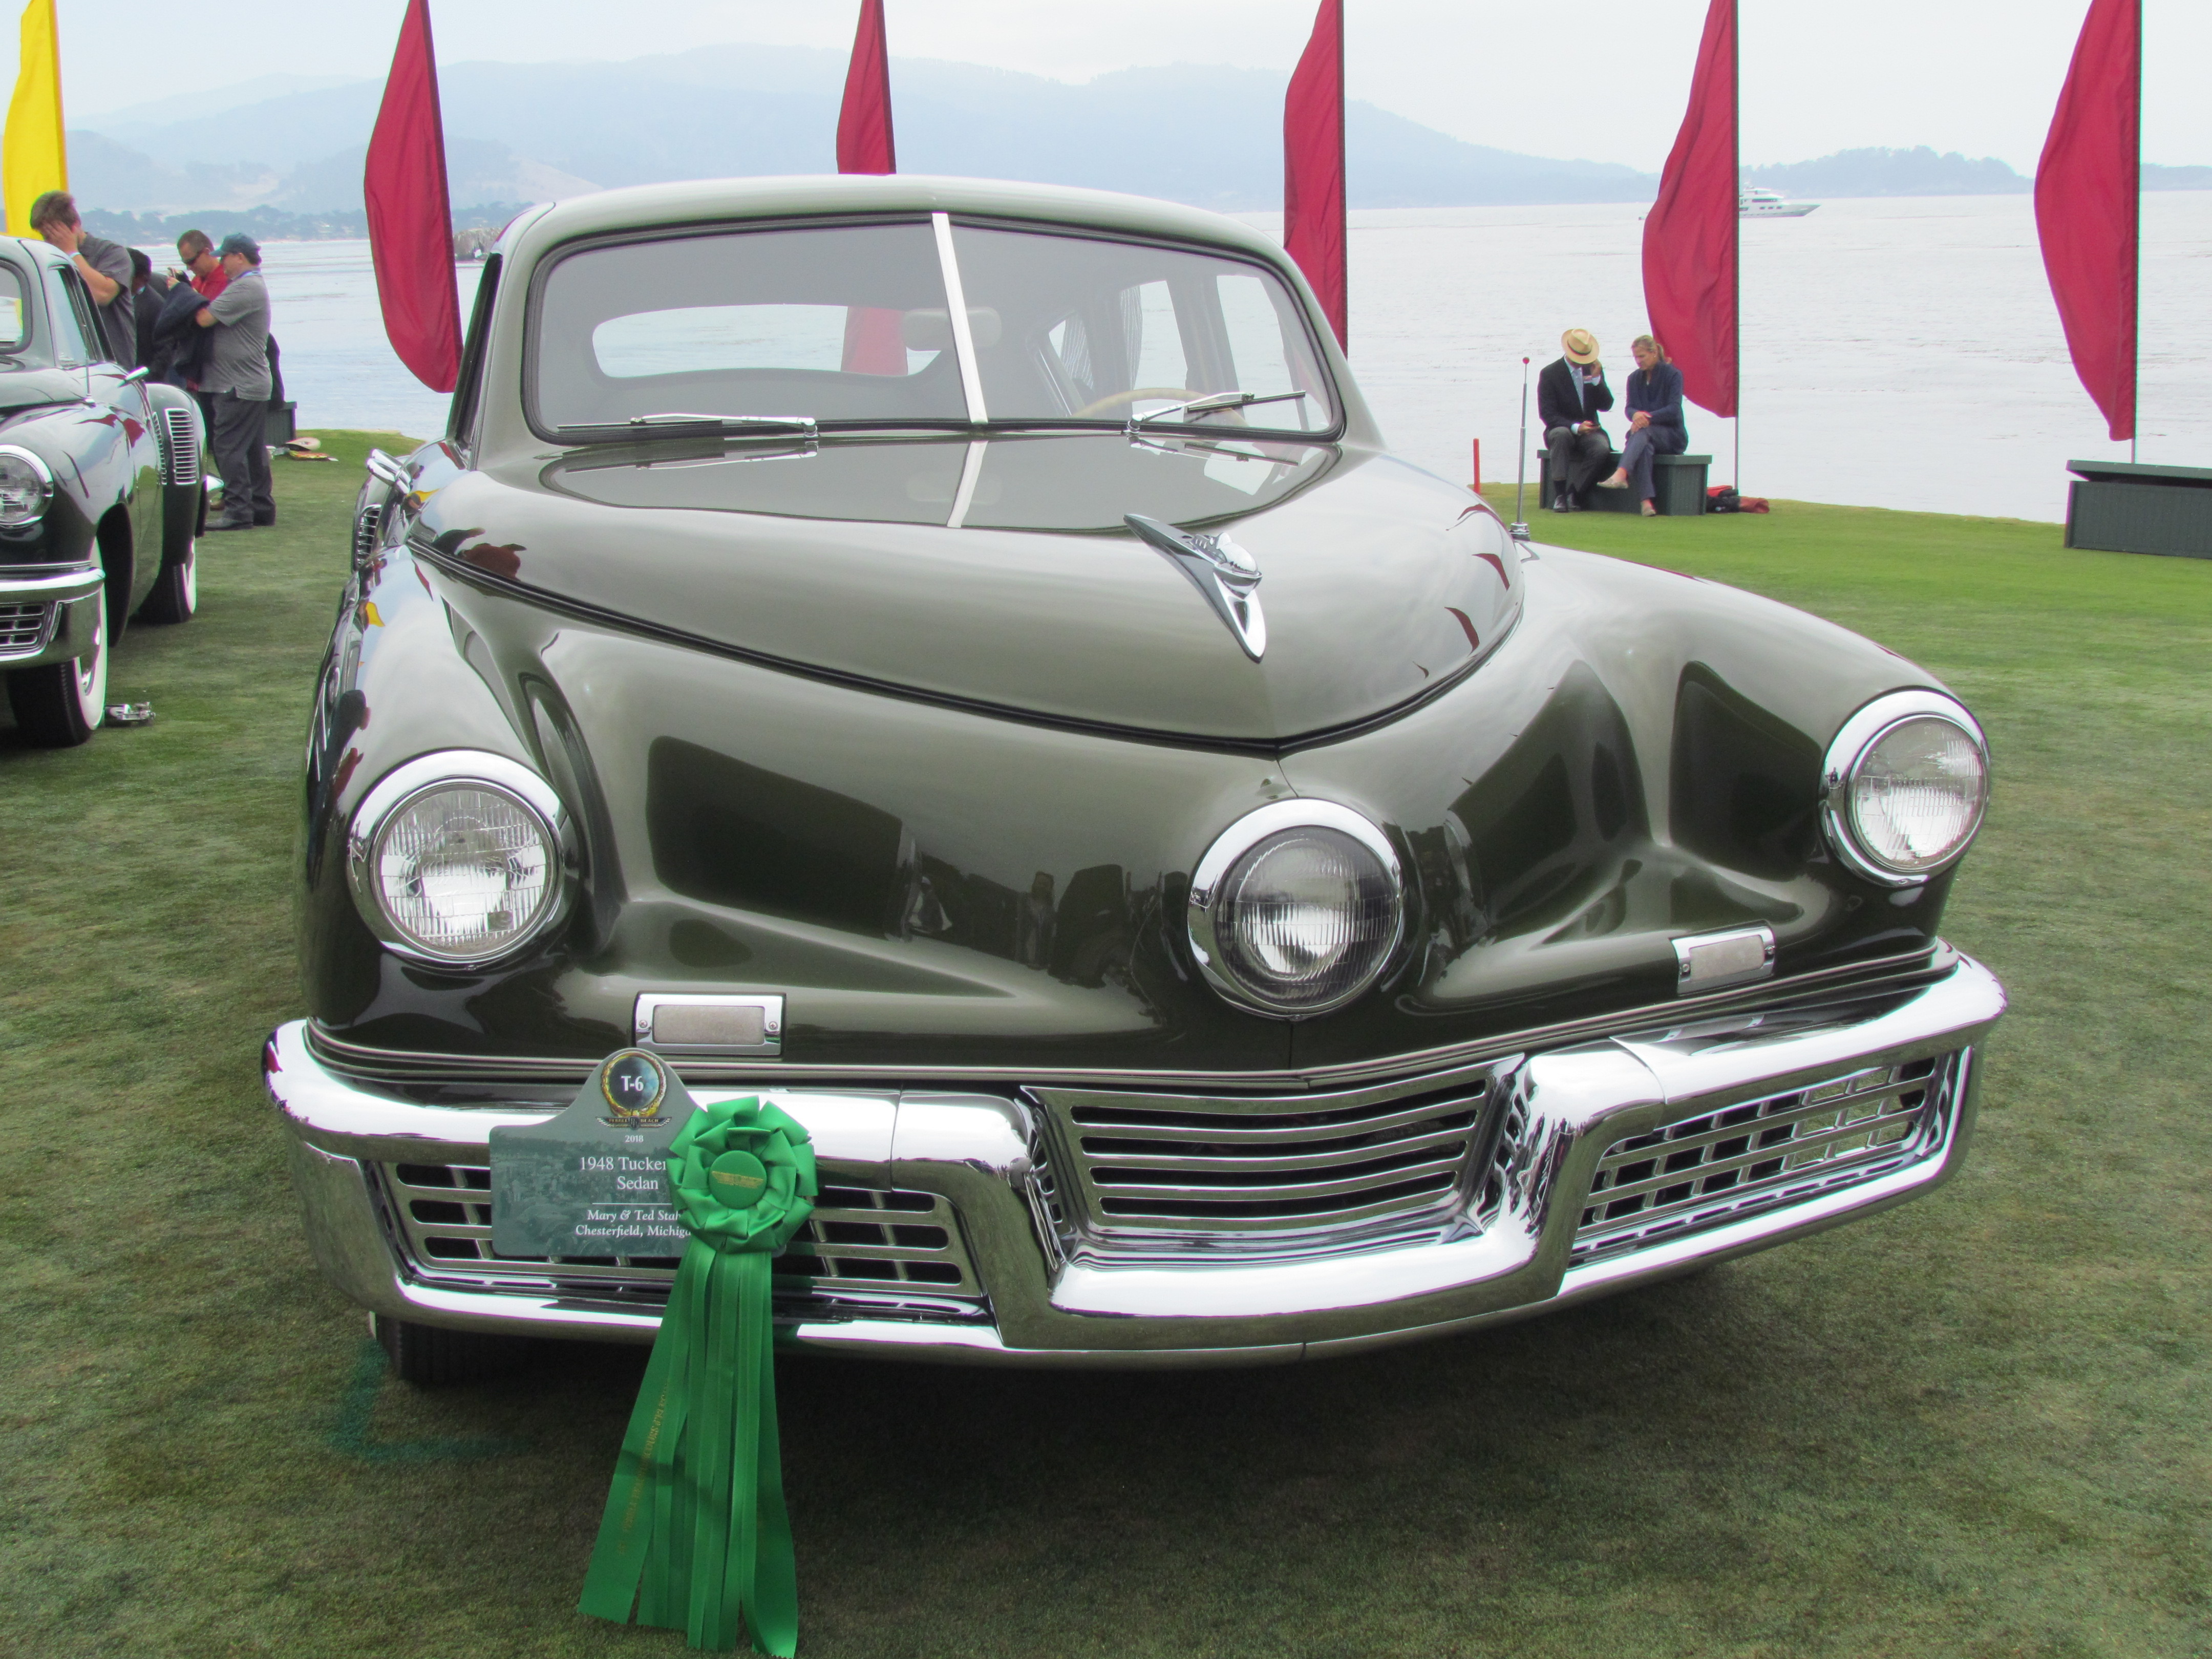 Tuckers, A trove of Tuckers at Pebble Beach, ClassicCars.com Journal